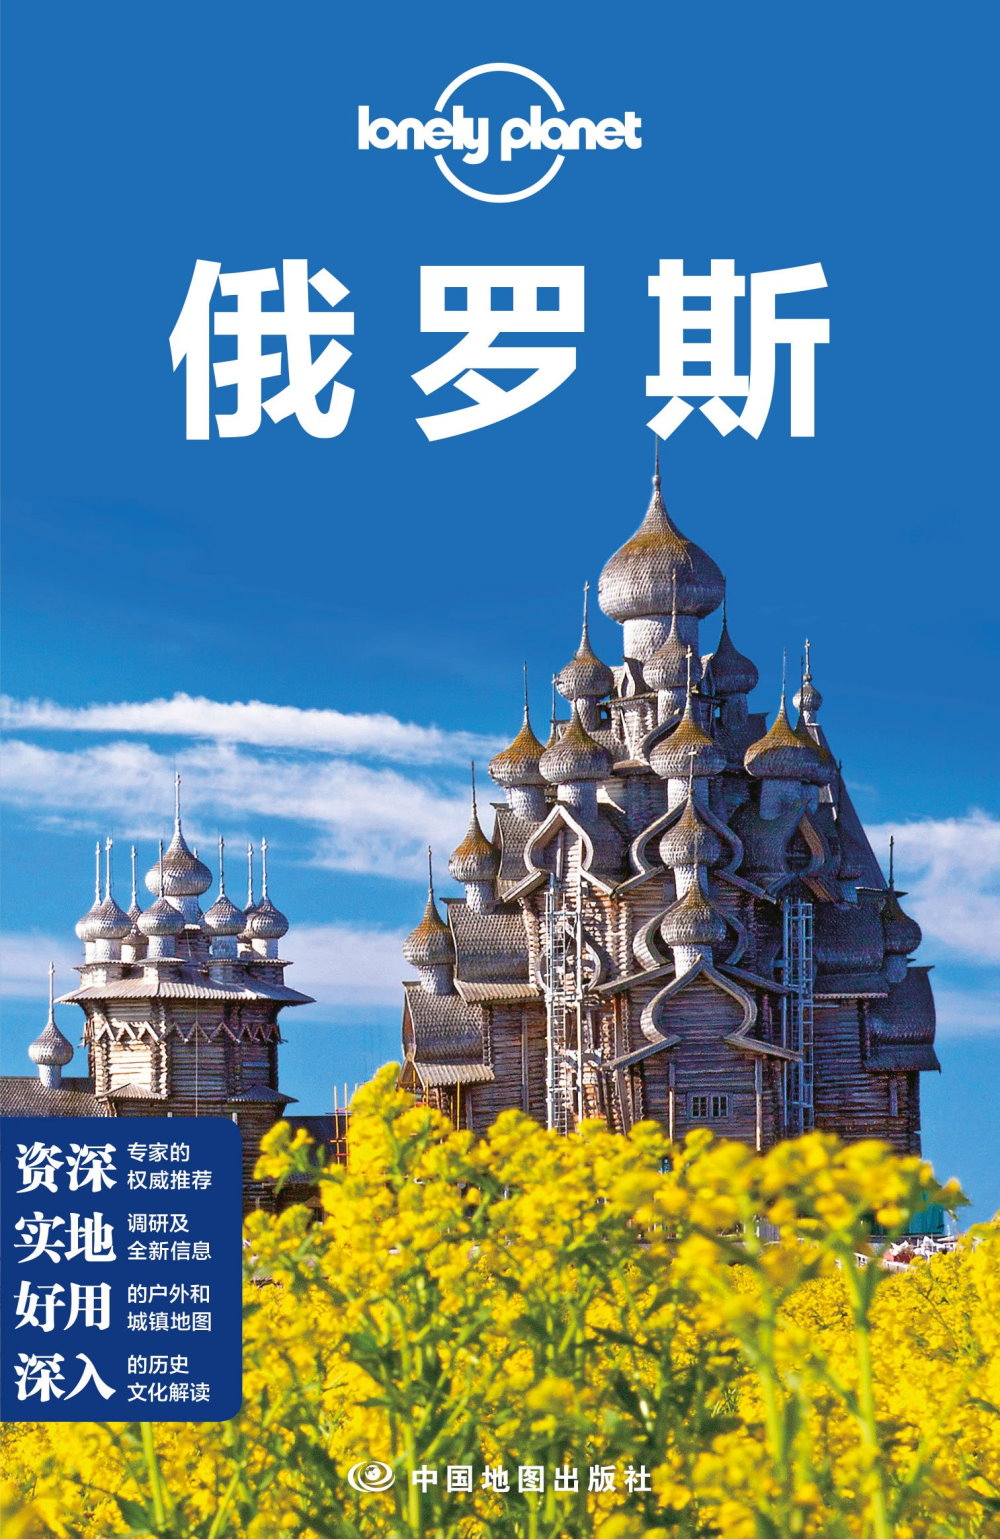 Lonely planet：俄羅斯